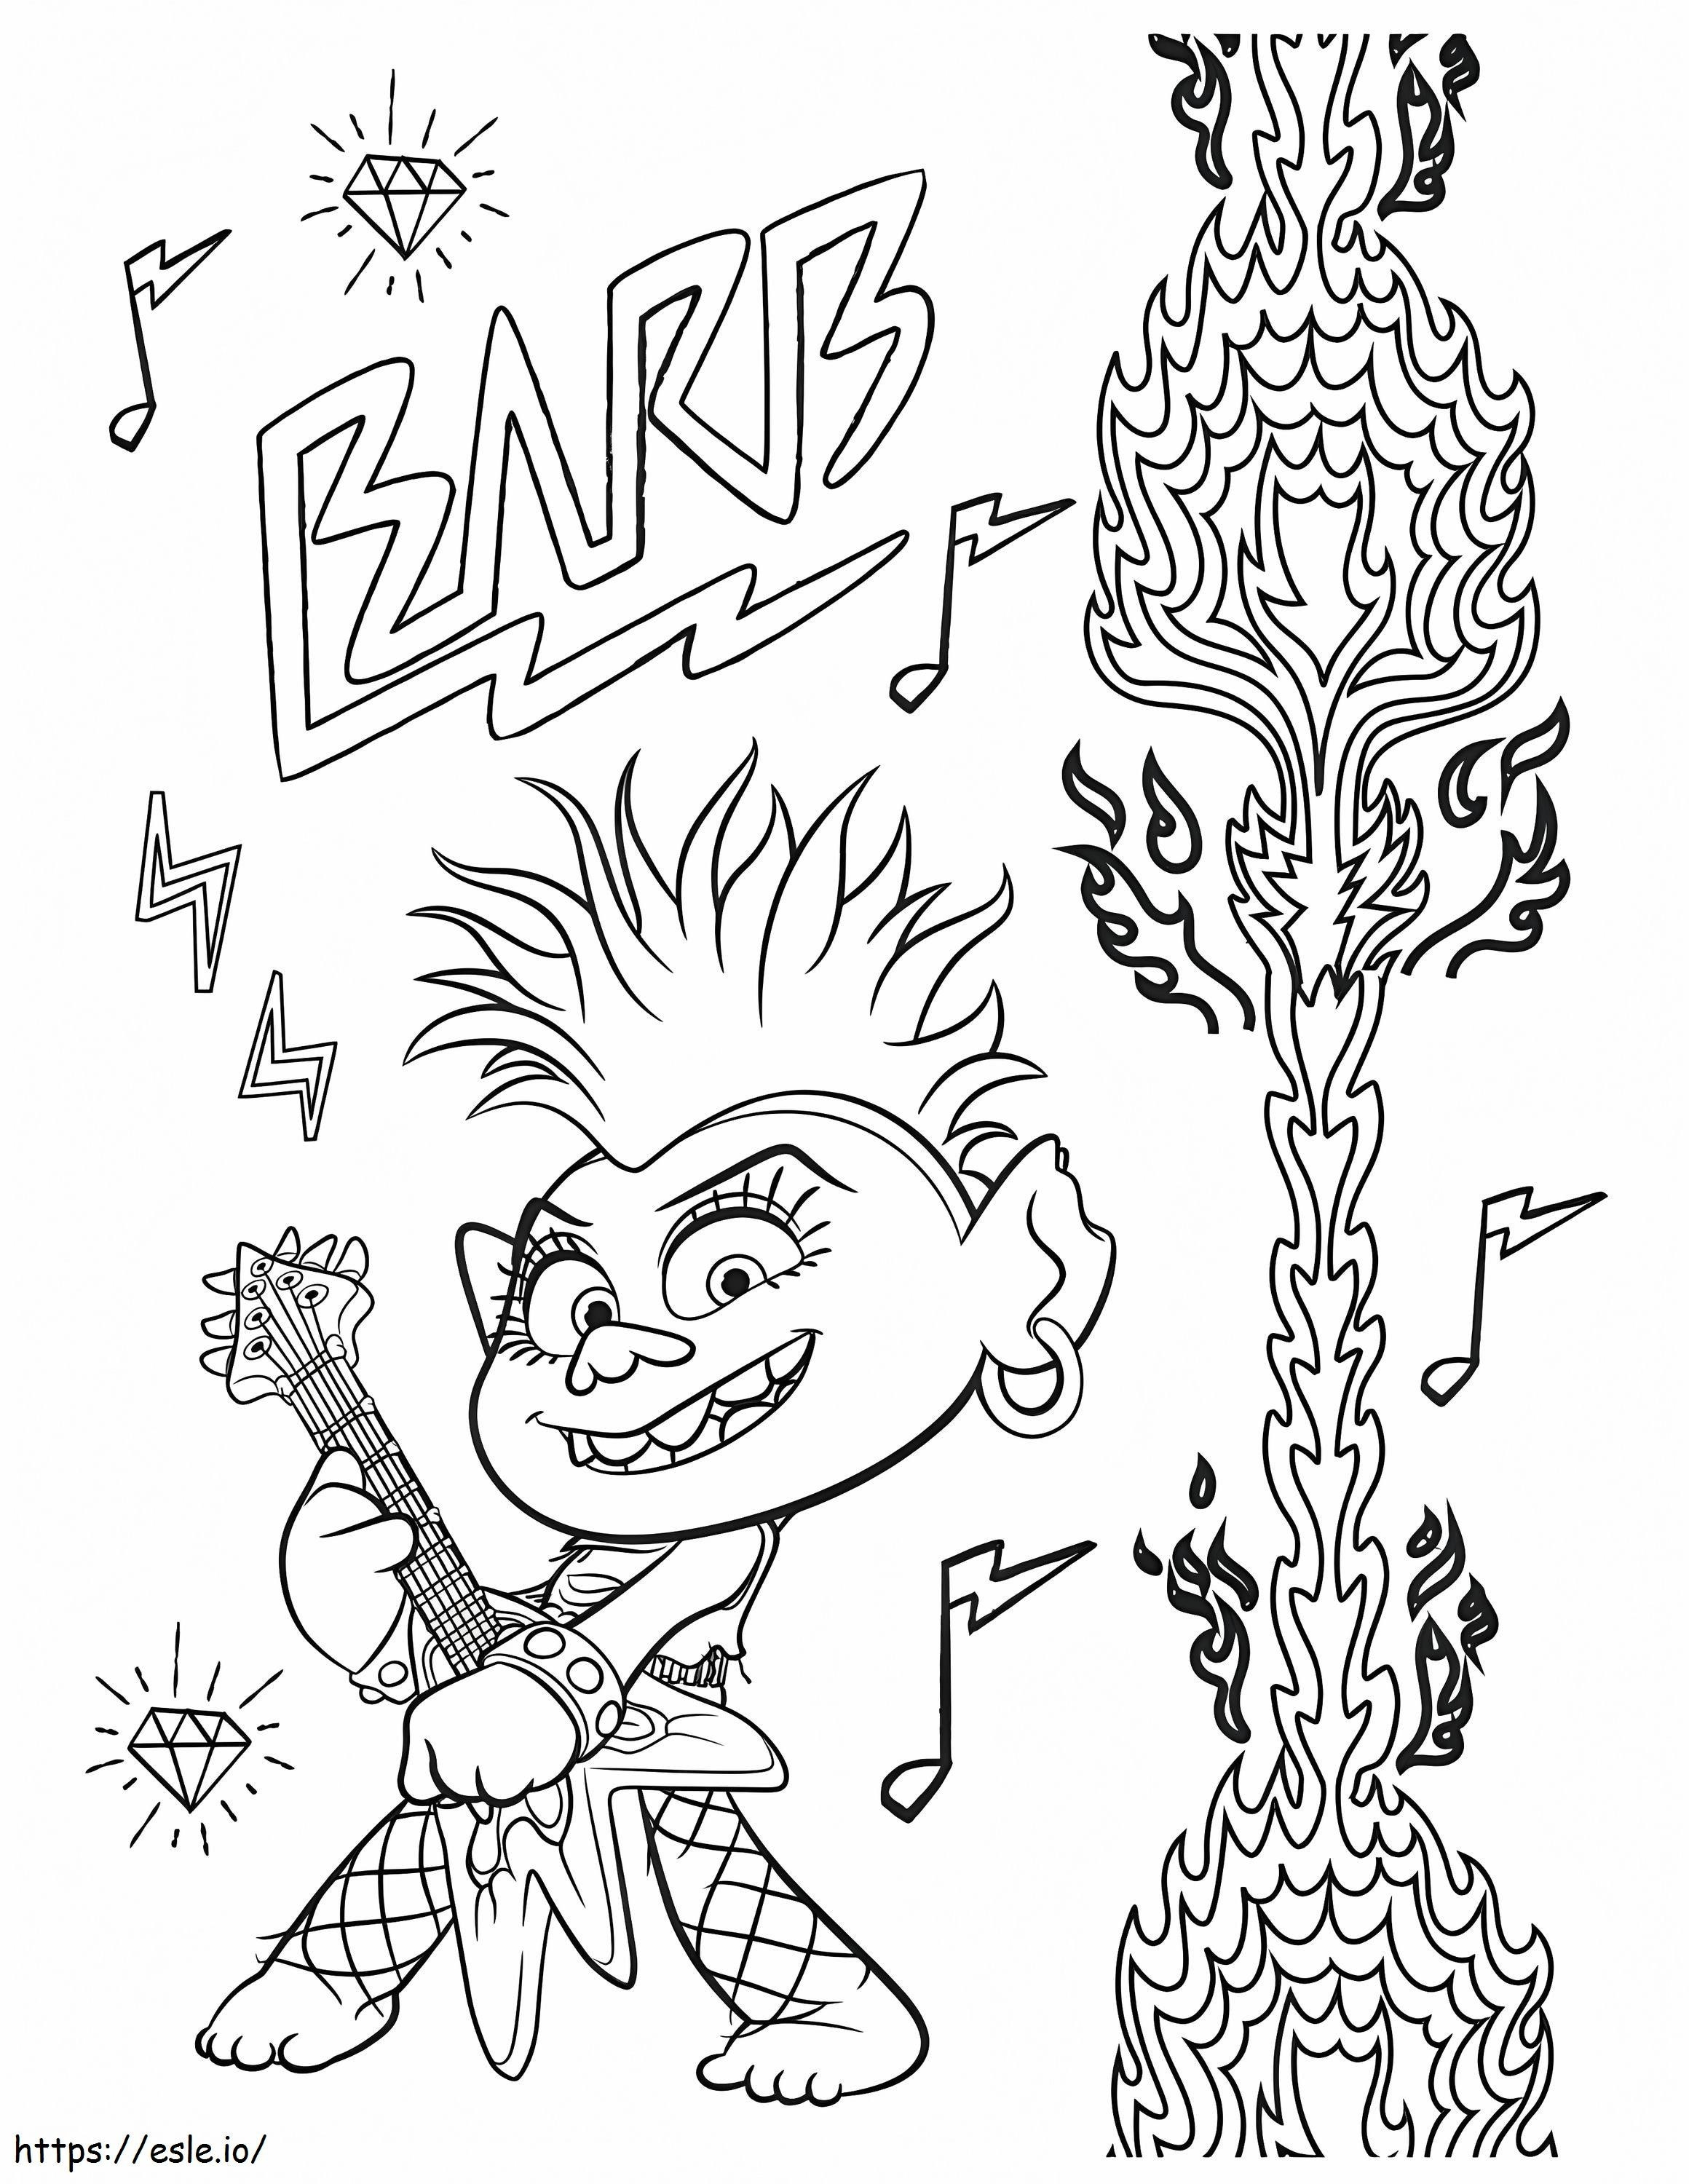 1589510419 Wonder Day Trolls 7 792X1024 1 coloring page